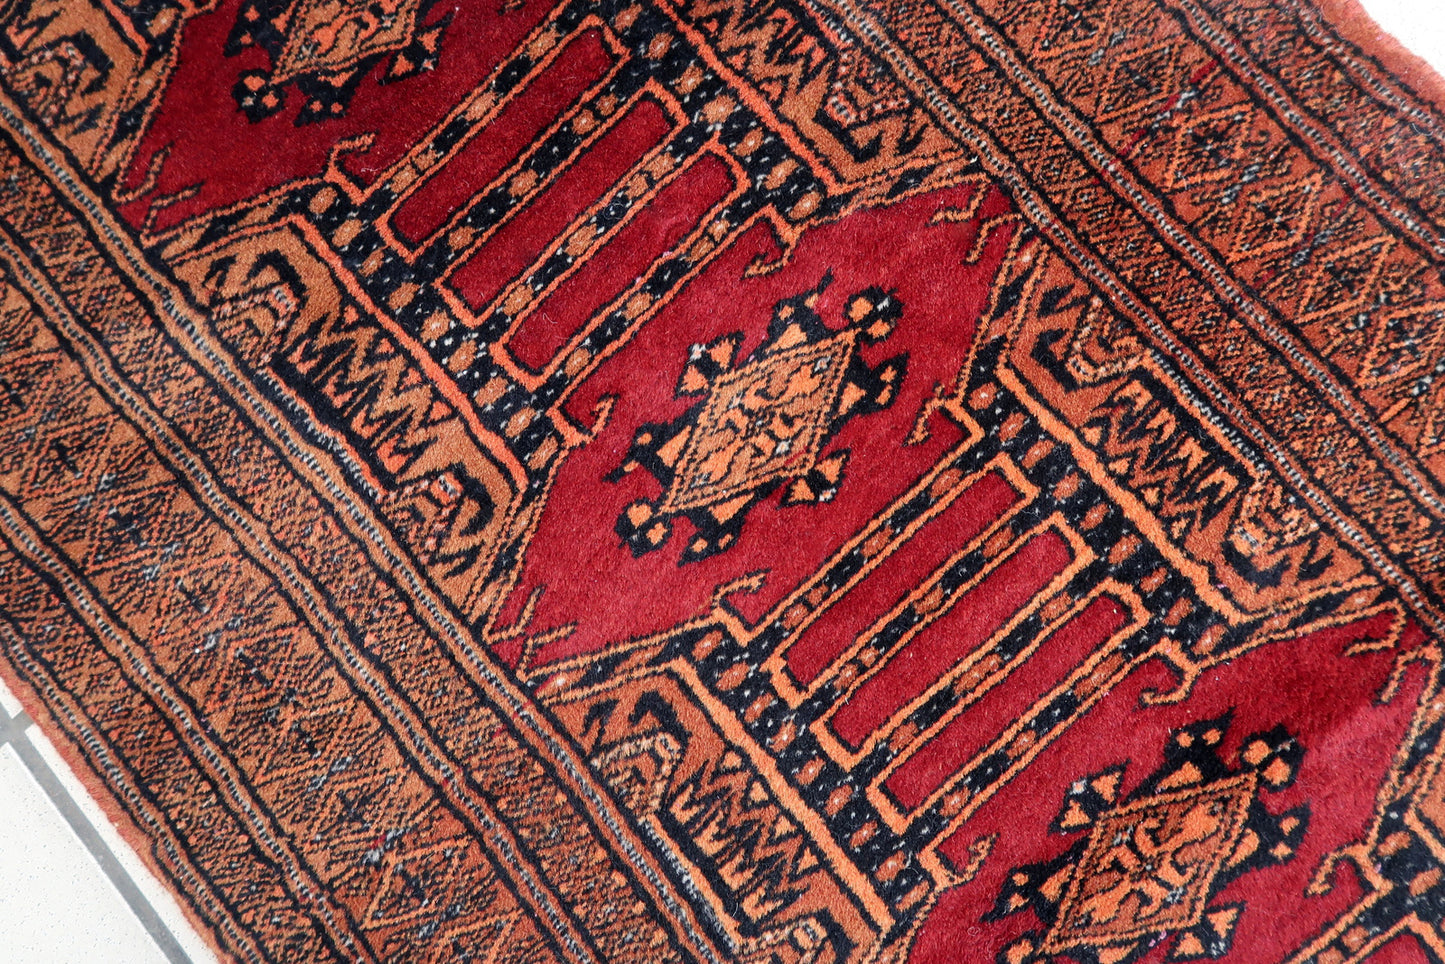 Handmade vintage Uzbek Bukhara narrow rug in red wool. The rug has unusual tribal design. It is from the end of 20th century, in original good condition.